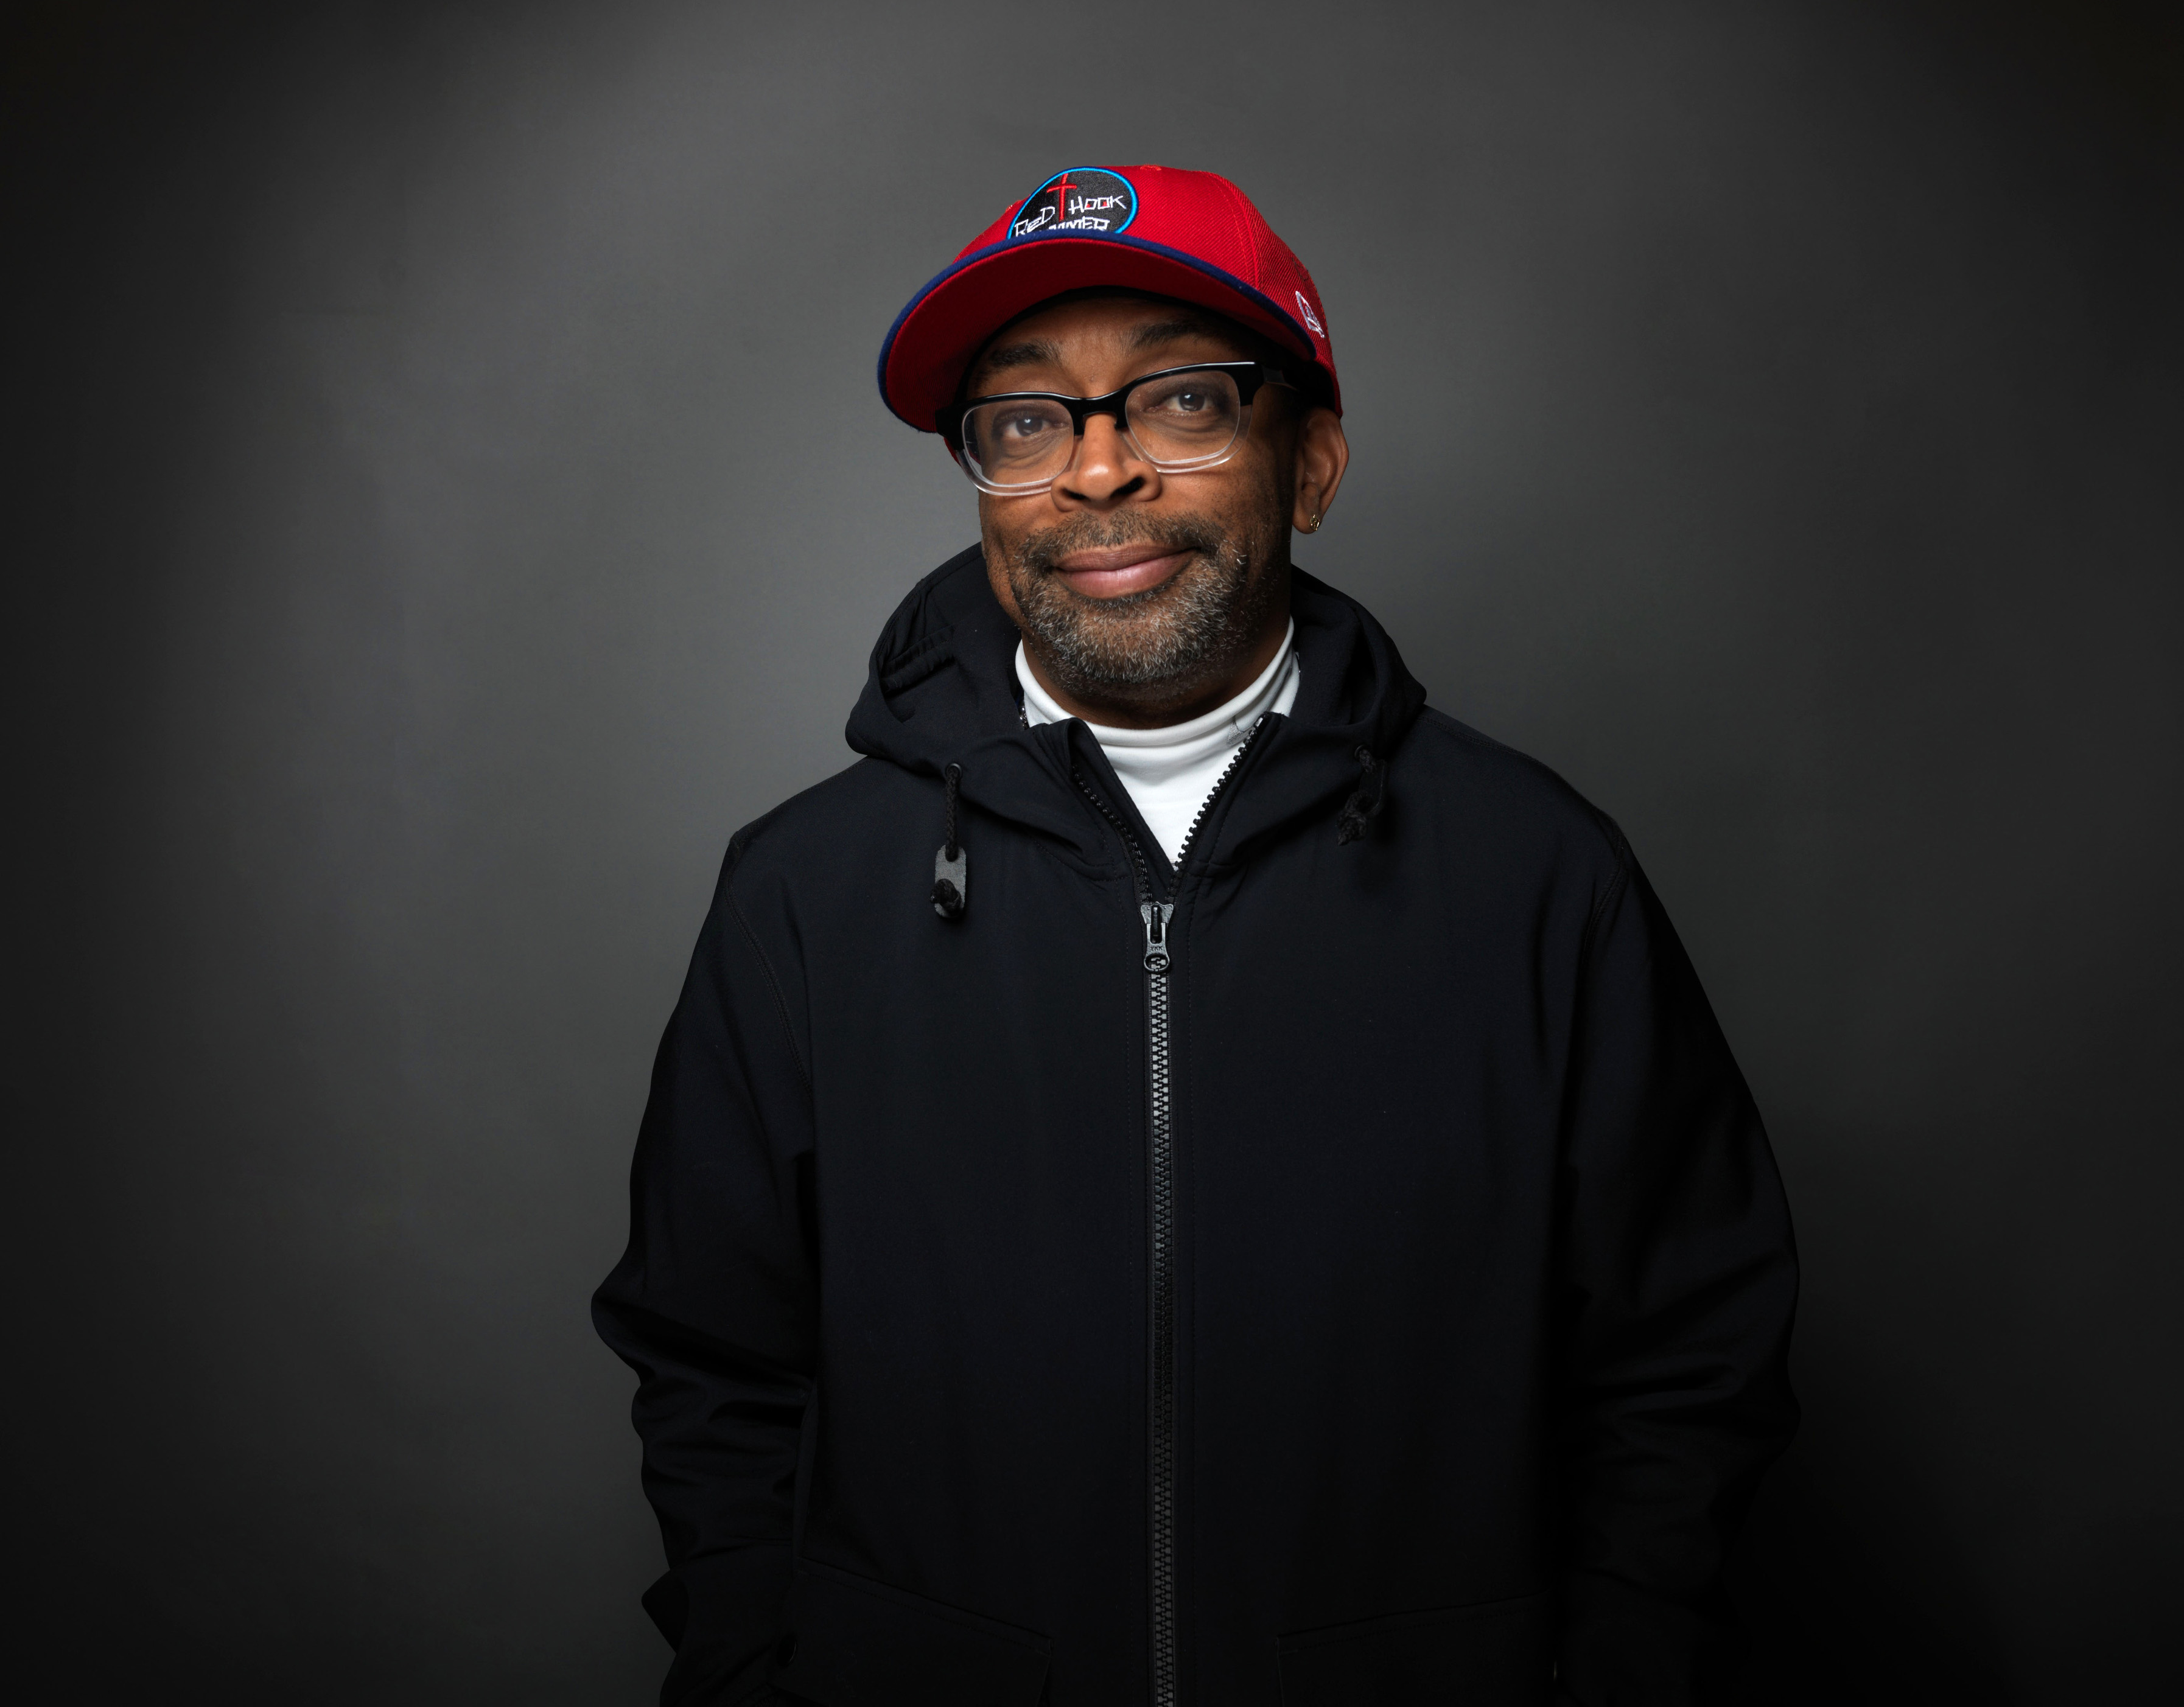 Spike Lee's look back at the Bad old days - NZ Herald